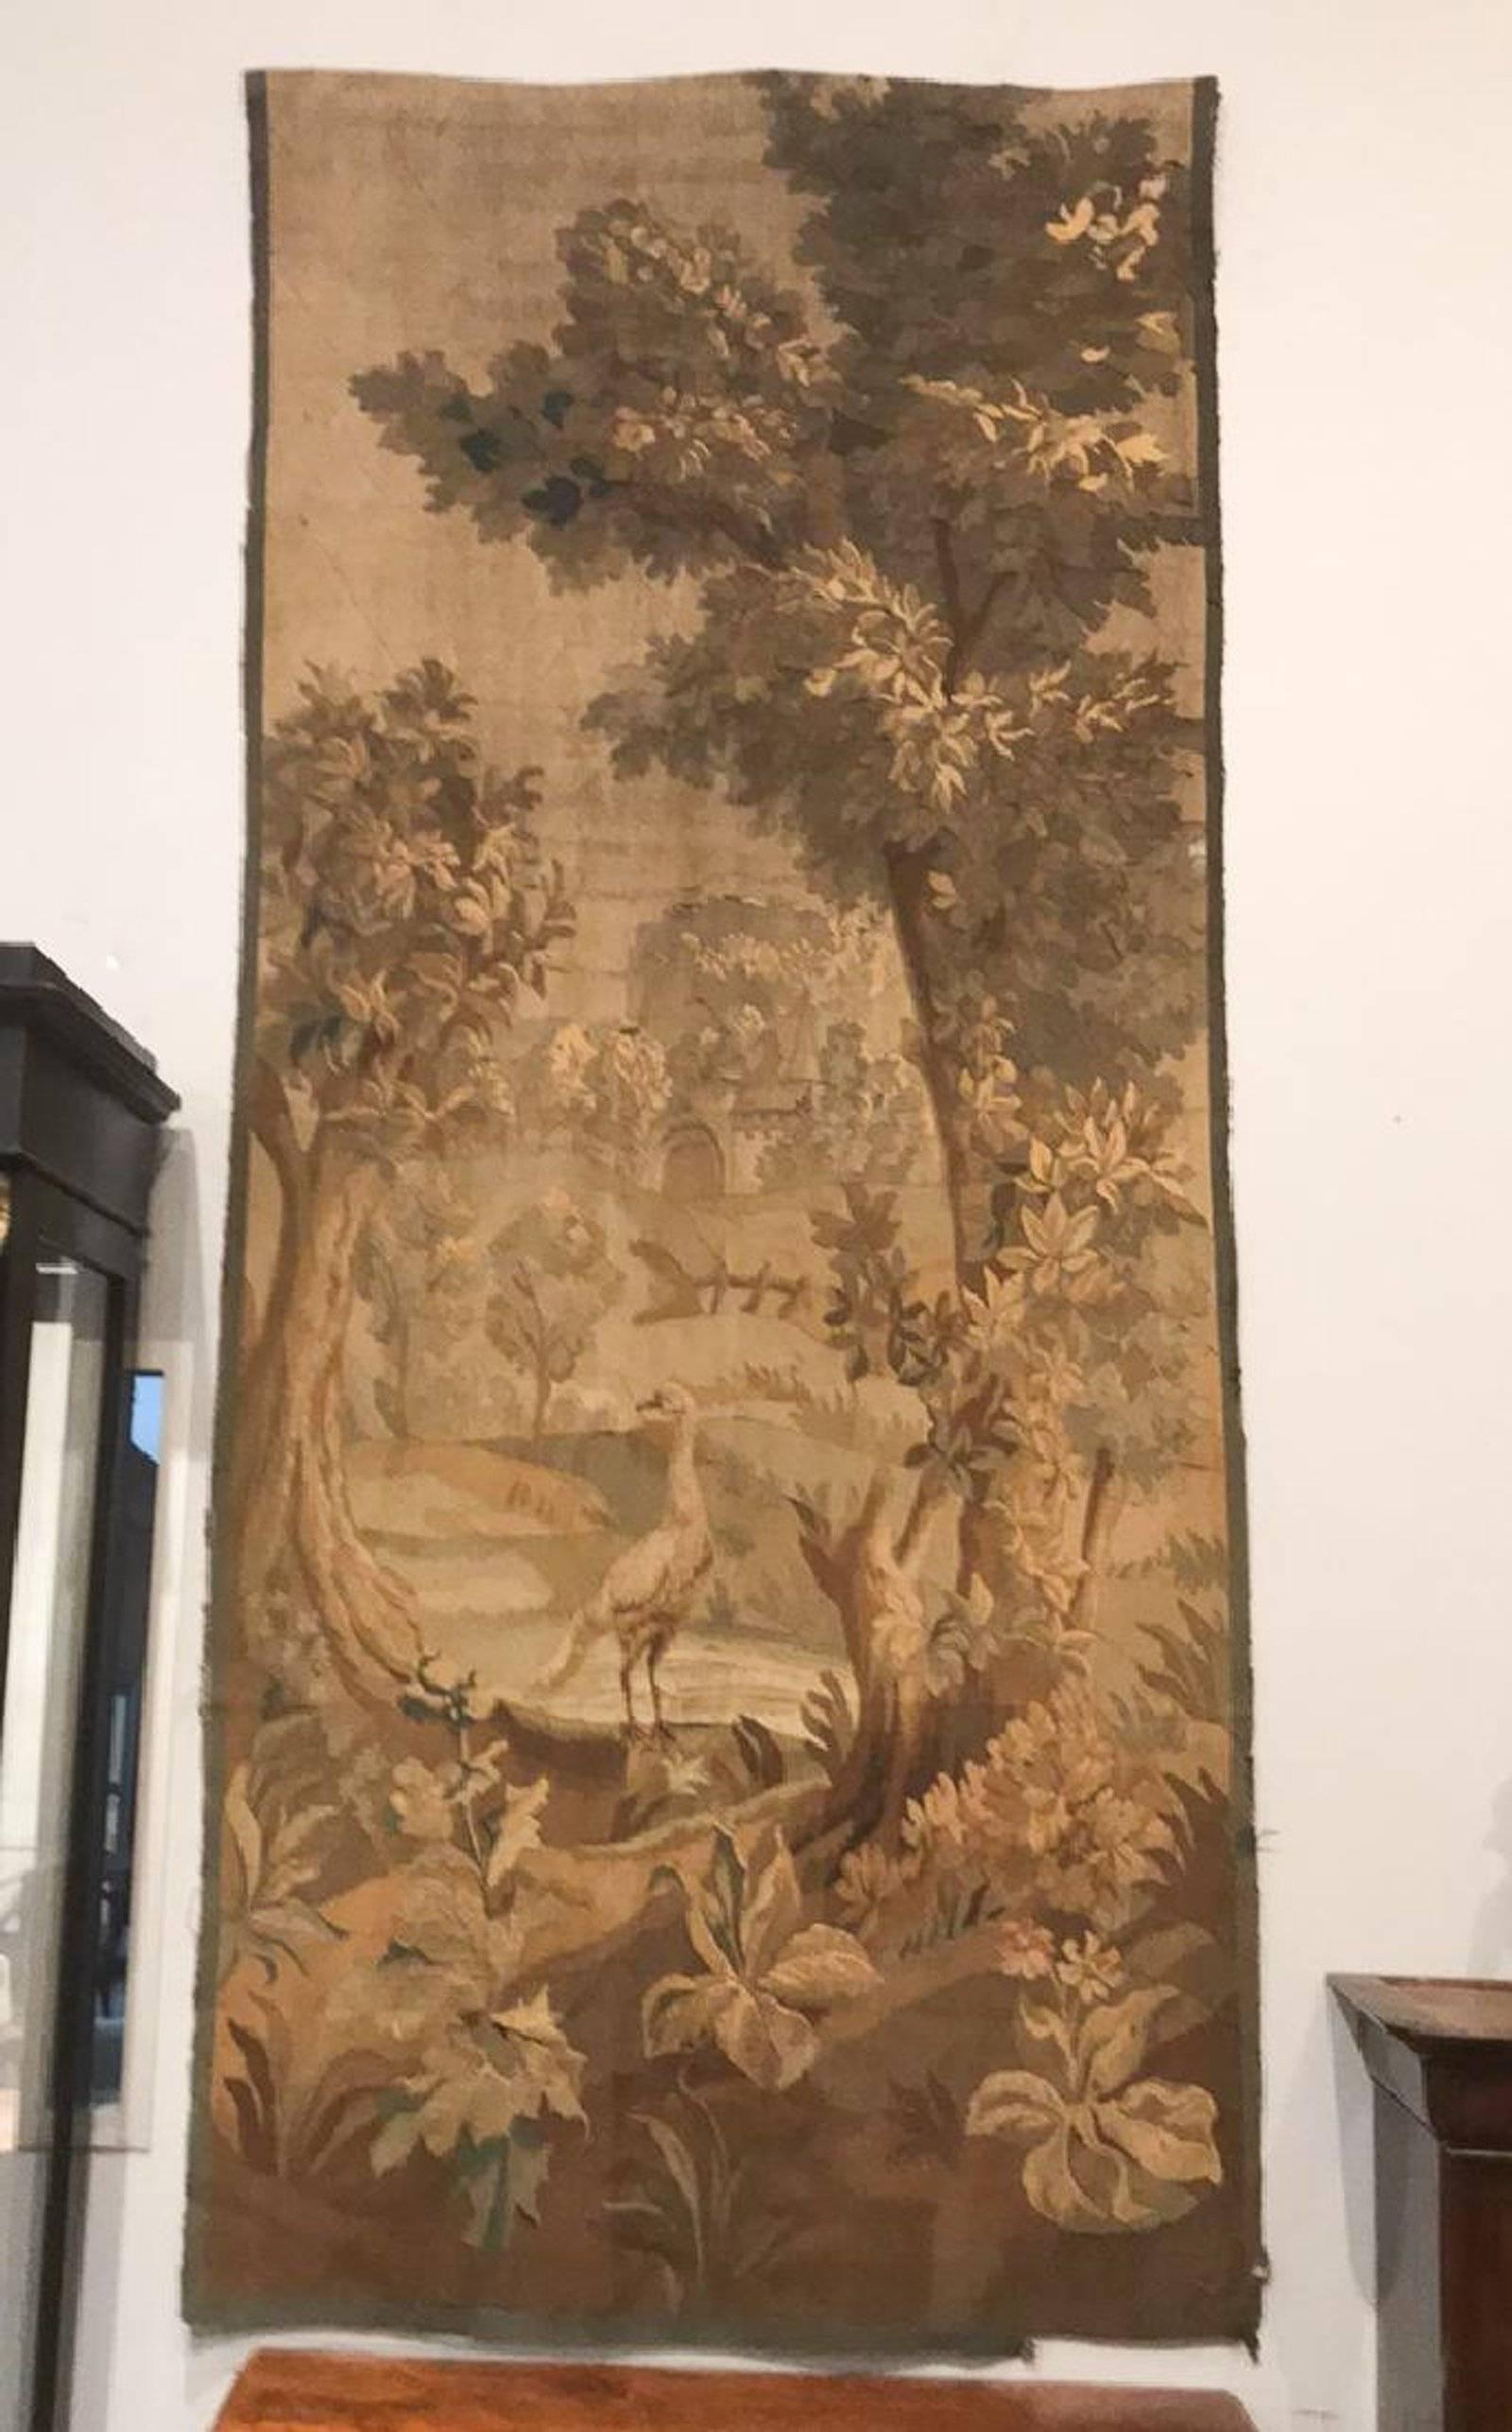 Magnificent pair of 19th century Flemish hand-sewn vertical tapestries depicting scenes of flowering landscapes with large trees, rivers, exotic birds and castles. Excellent detail.

Vibrant yet subtle colors.

Very large in size, in good